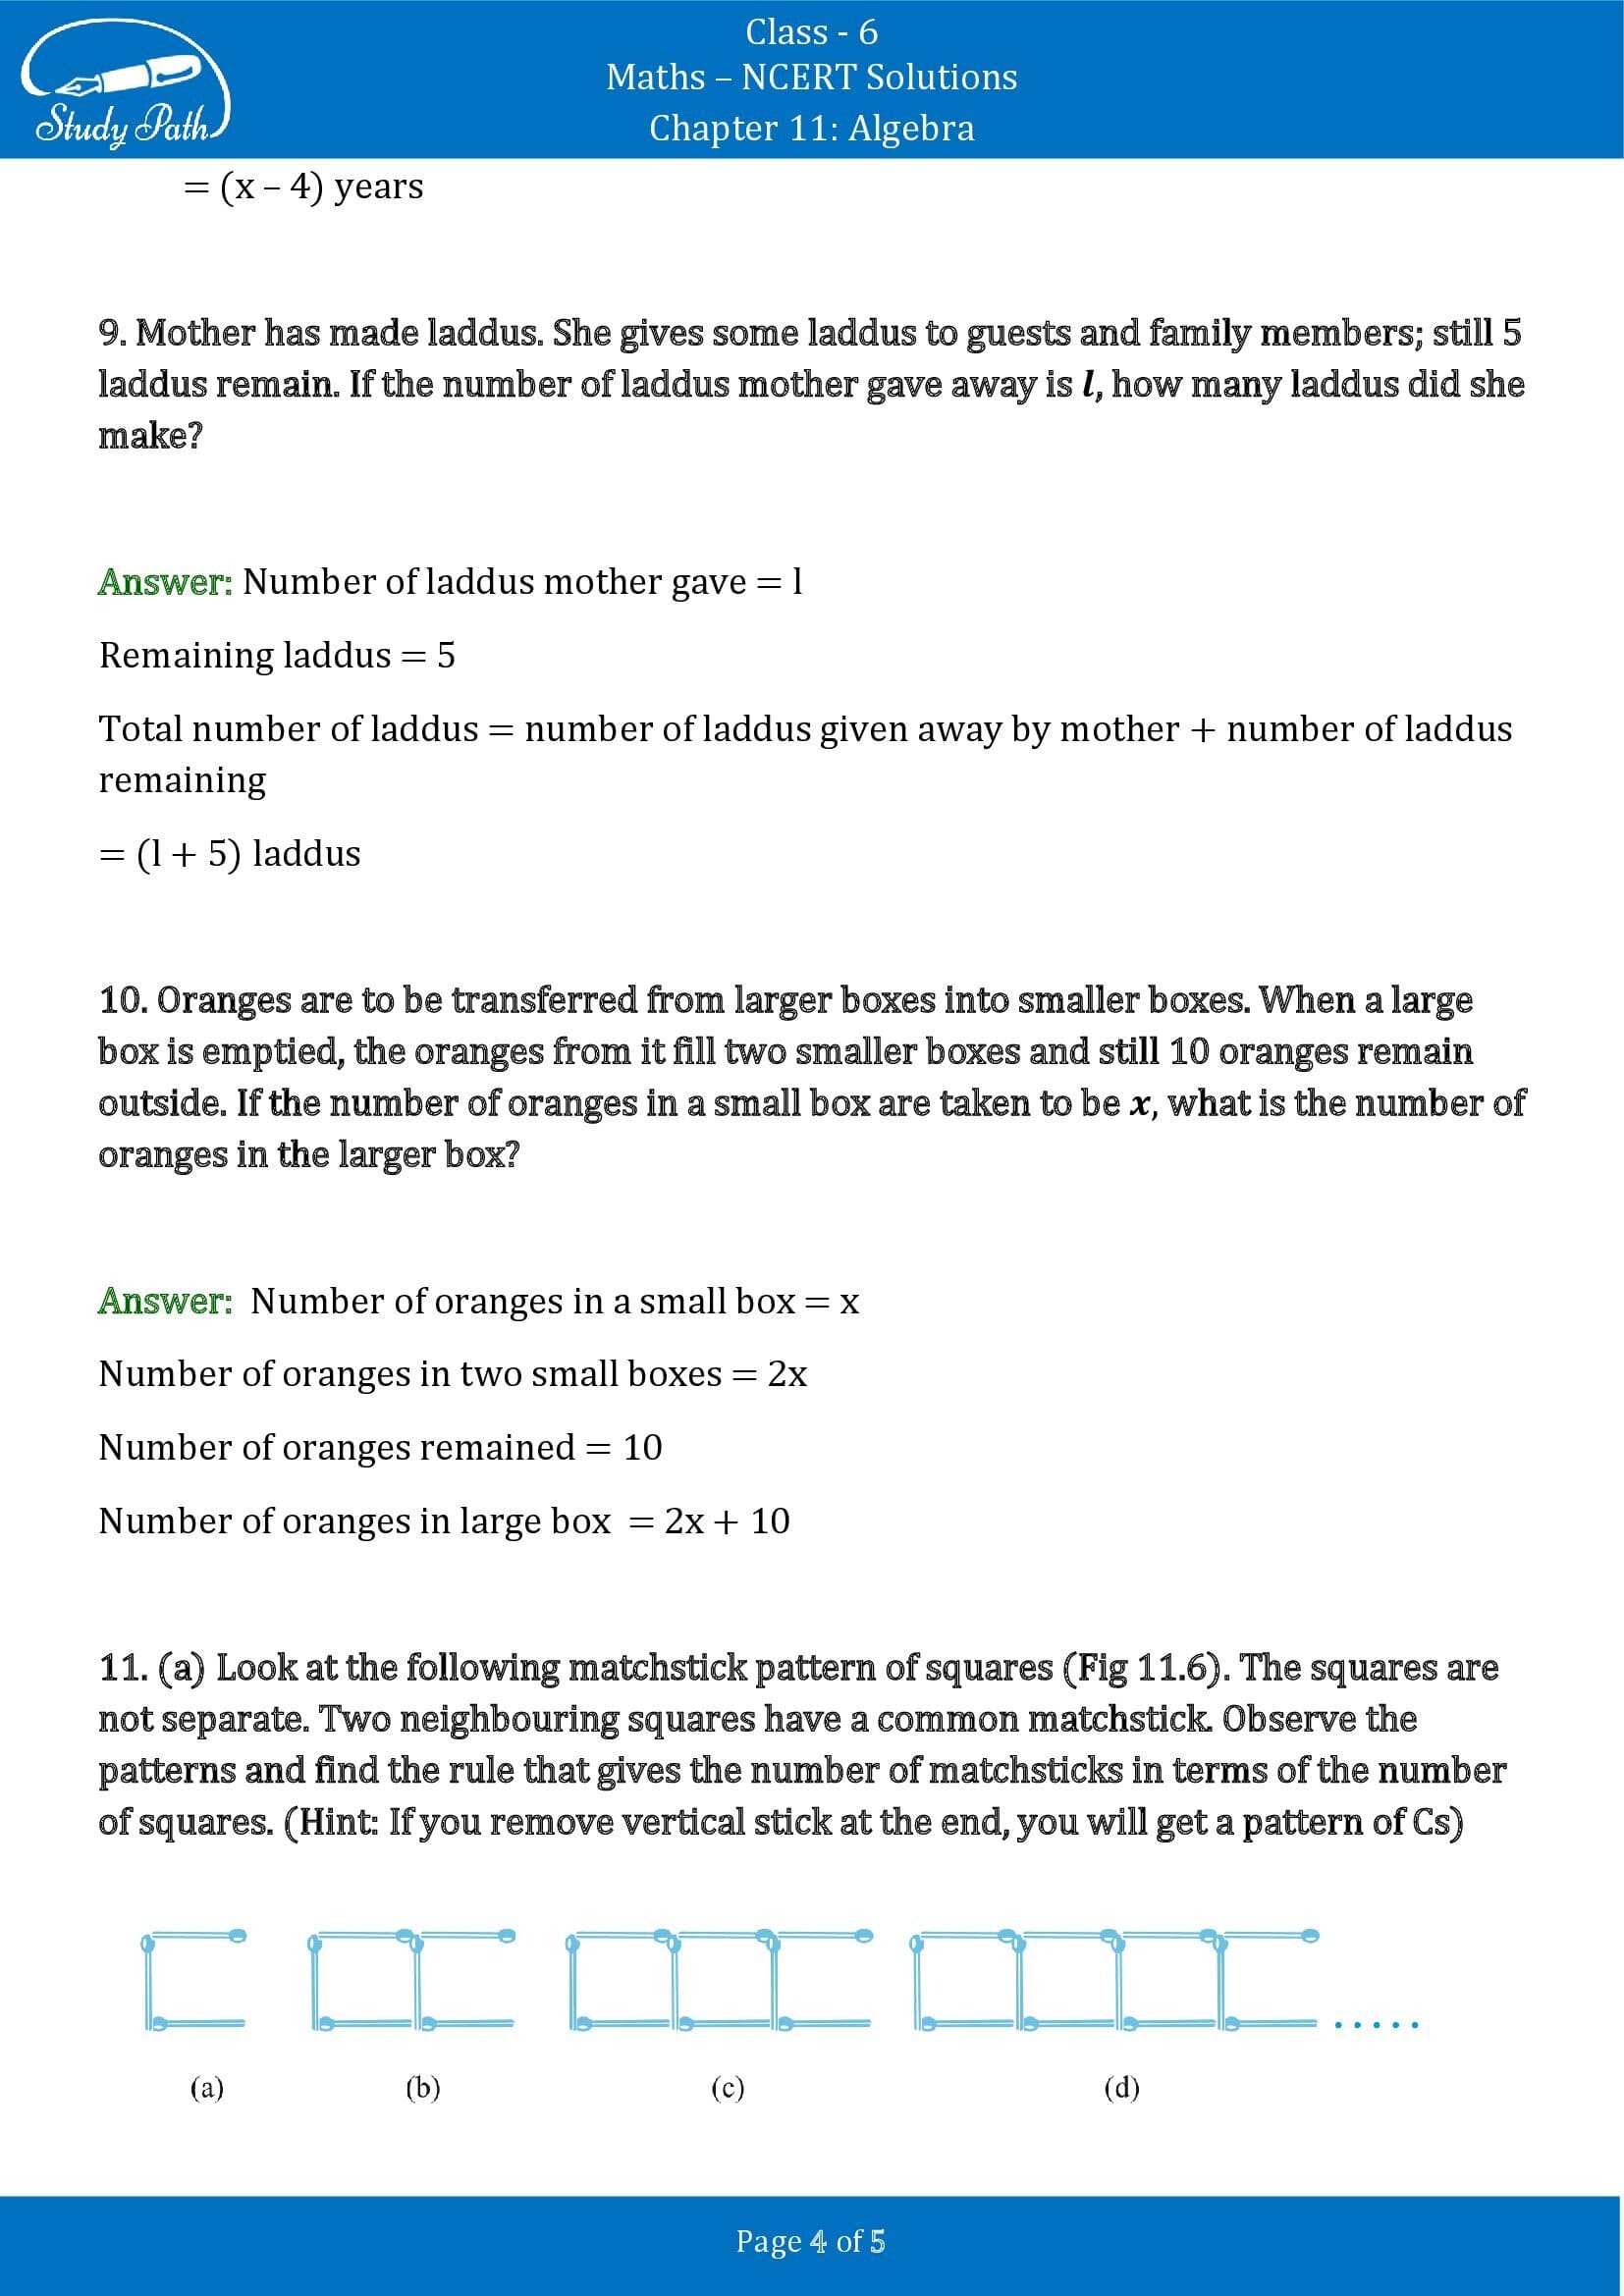 NCERT Solutions for Class 6 Maths Chapter 11 Algebra Exercise 11.1 00004